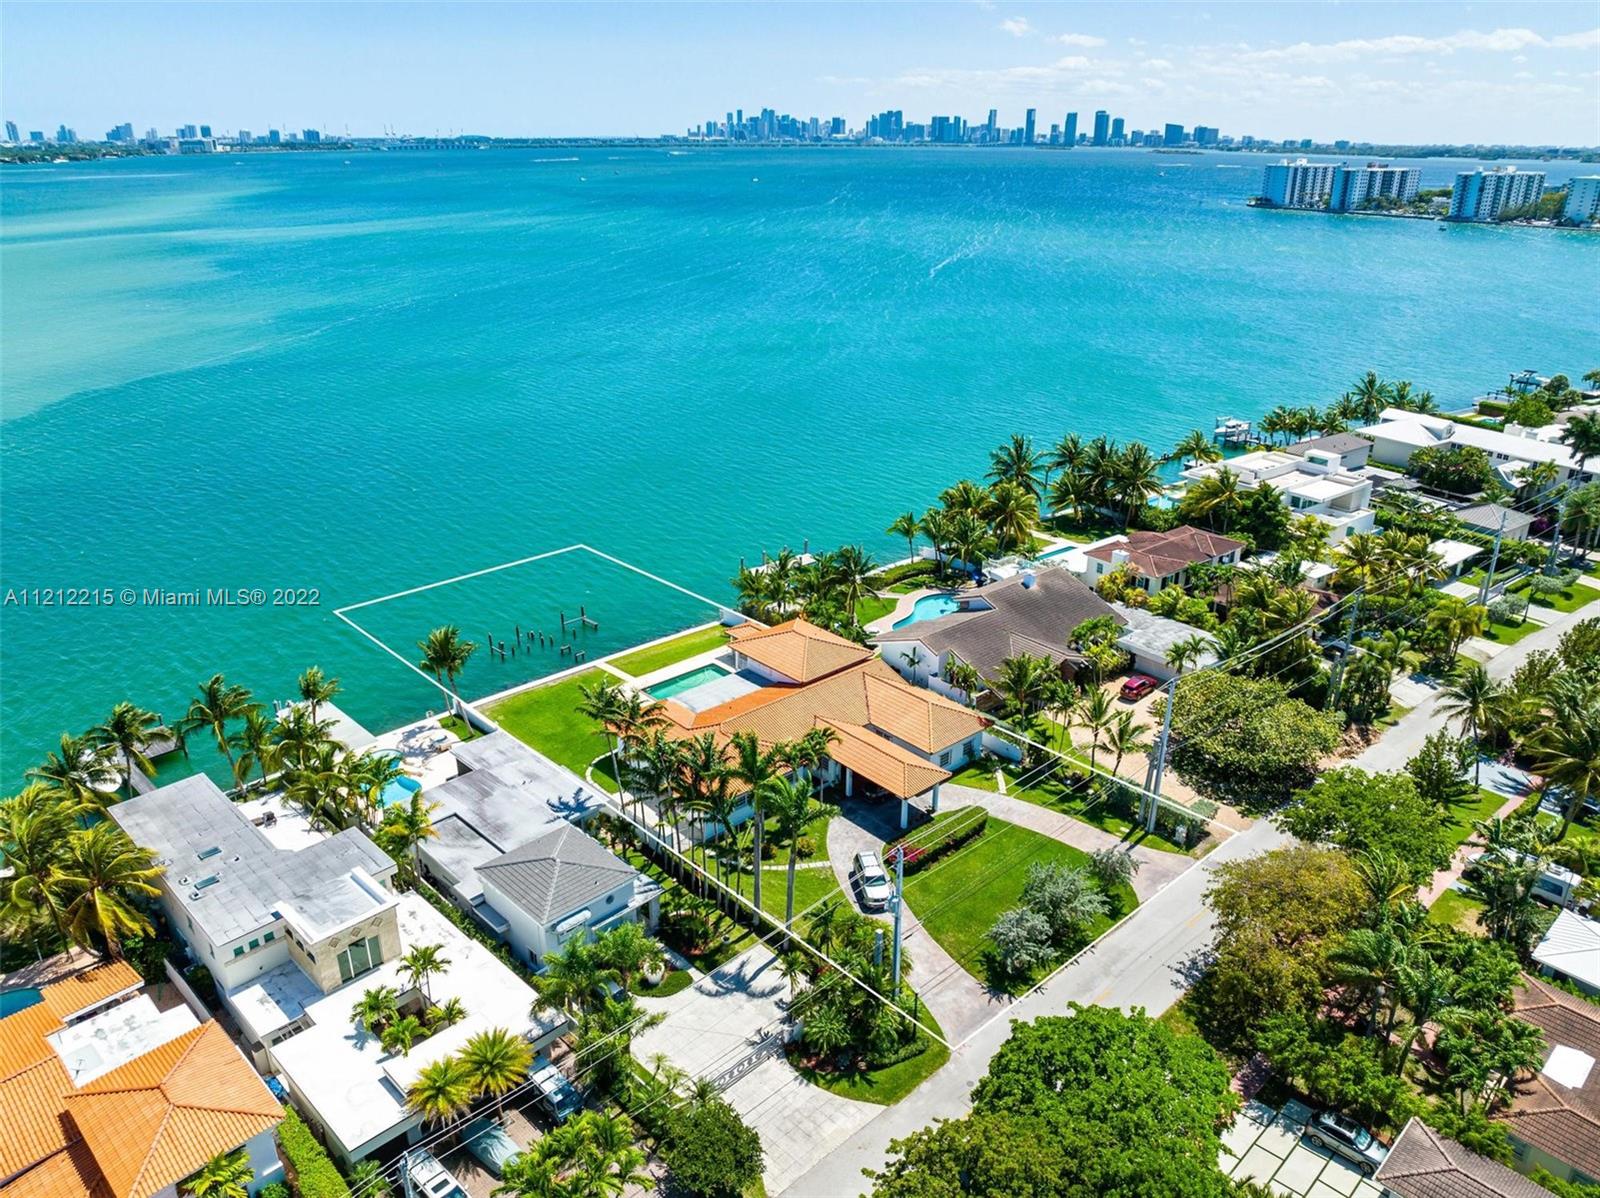 One of the largest lot on Bay Dr! Rare opportunity to own a 17,340 sqft waterfront double lot in Normandy Isles whether it is to build one incredible mansion, or subdivide into two lots. 
This extraordinary oversized property offers over 100+ feet of water frontage showcasing spectacular and unobstructed wide open Biscayne Bay and Downtown Miami skyline views offering incredible sunrises and sunsets.
A boater’s paradise with the most coveted East and South facing views and no bridges to bay, a lifestyle on the water awaits you. 
Live in close proximity to Bal Harbour Shops and world class shopping, dining and beaches.